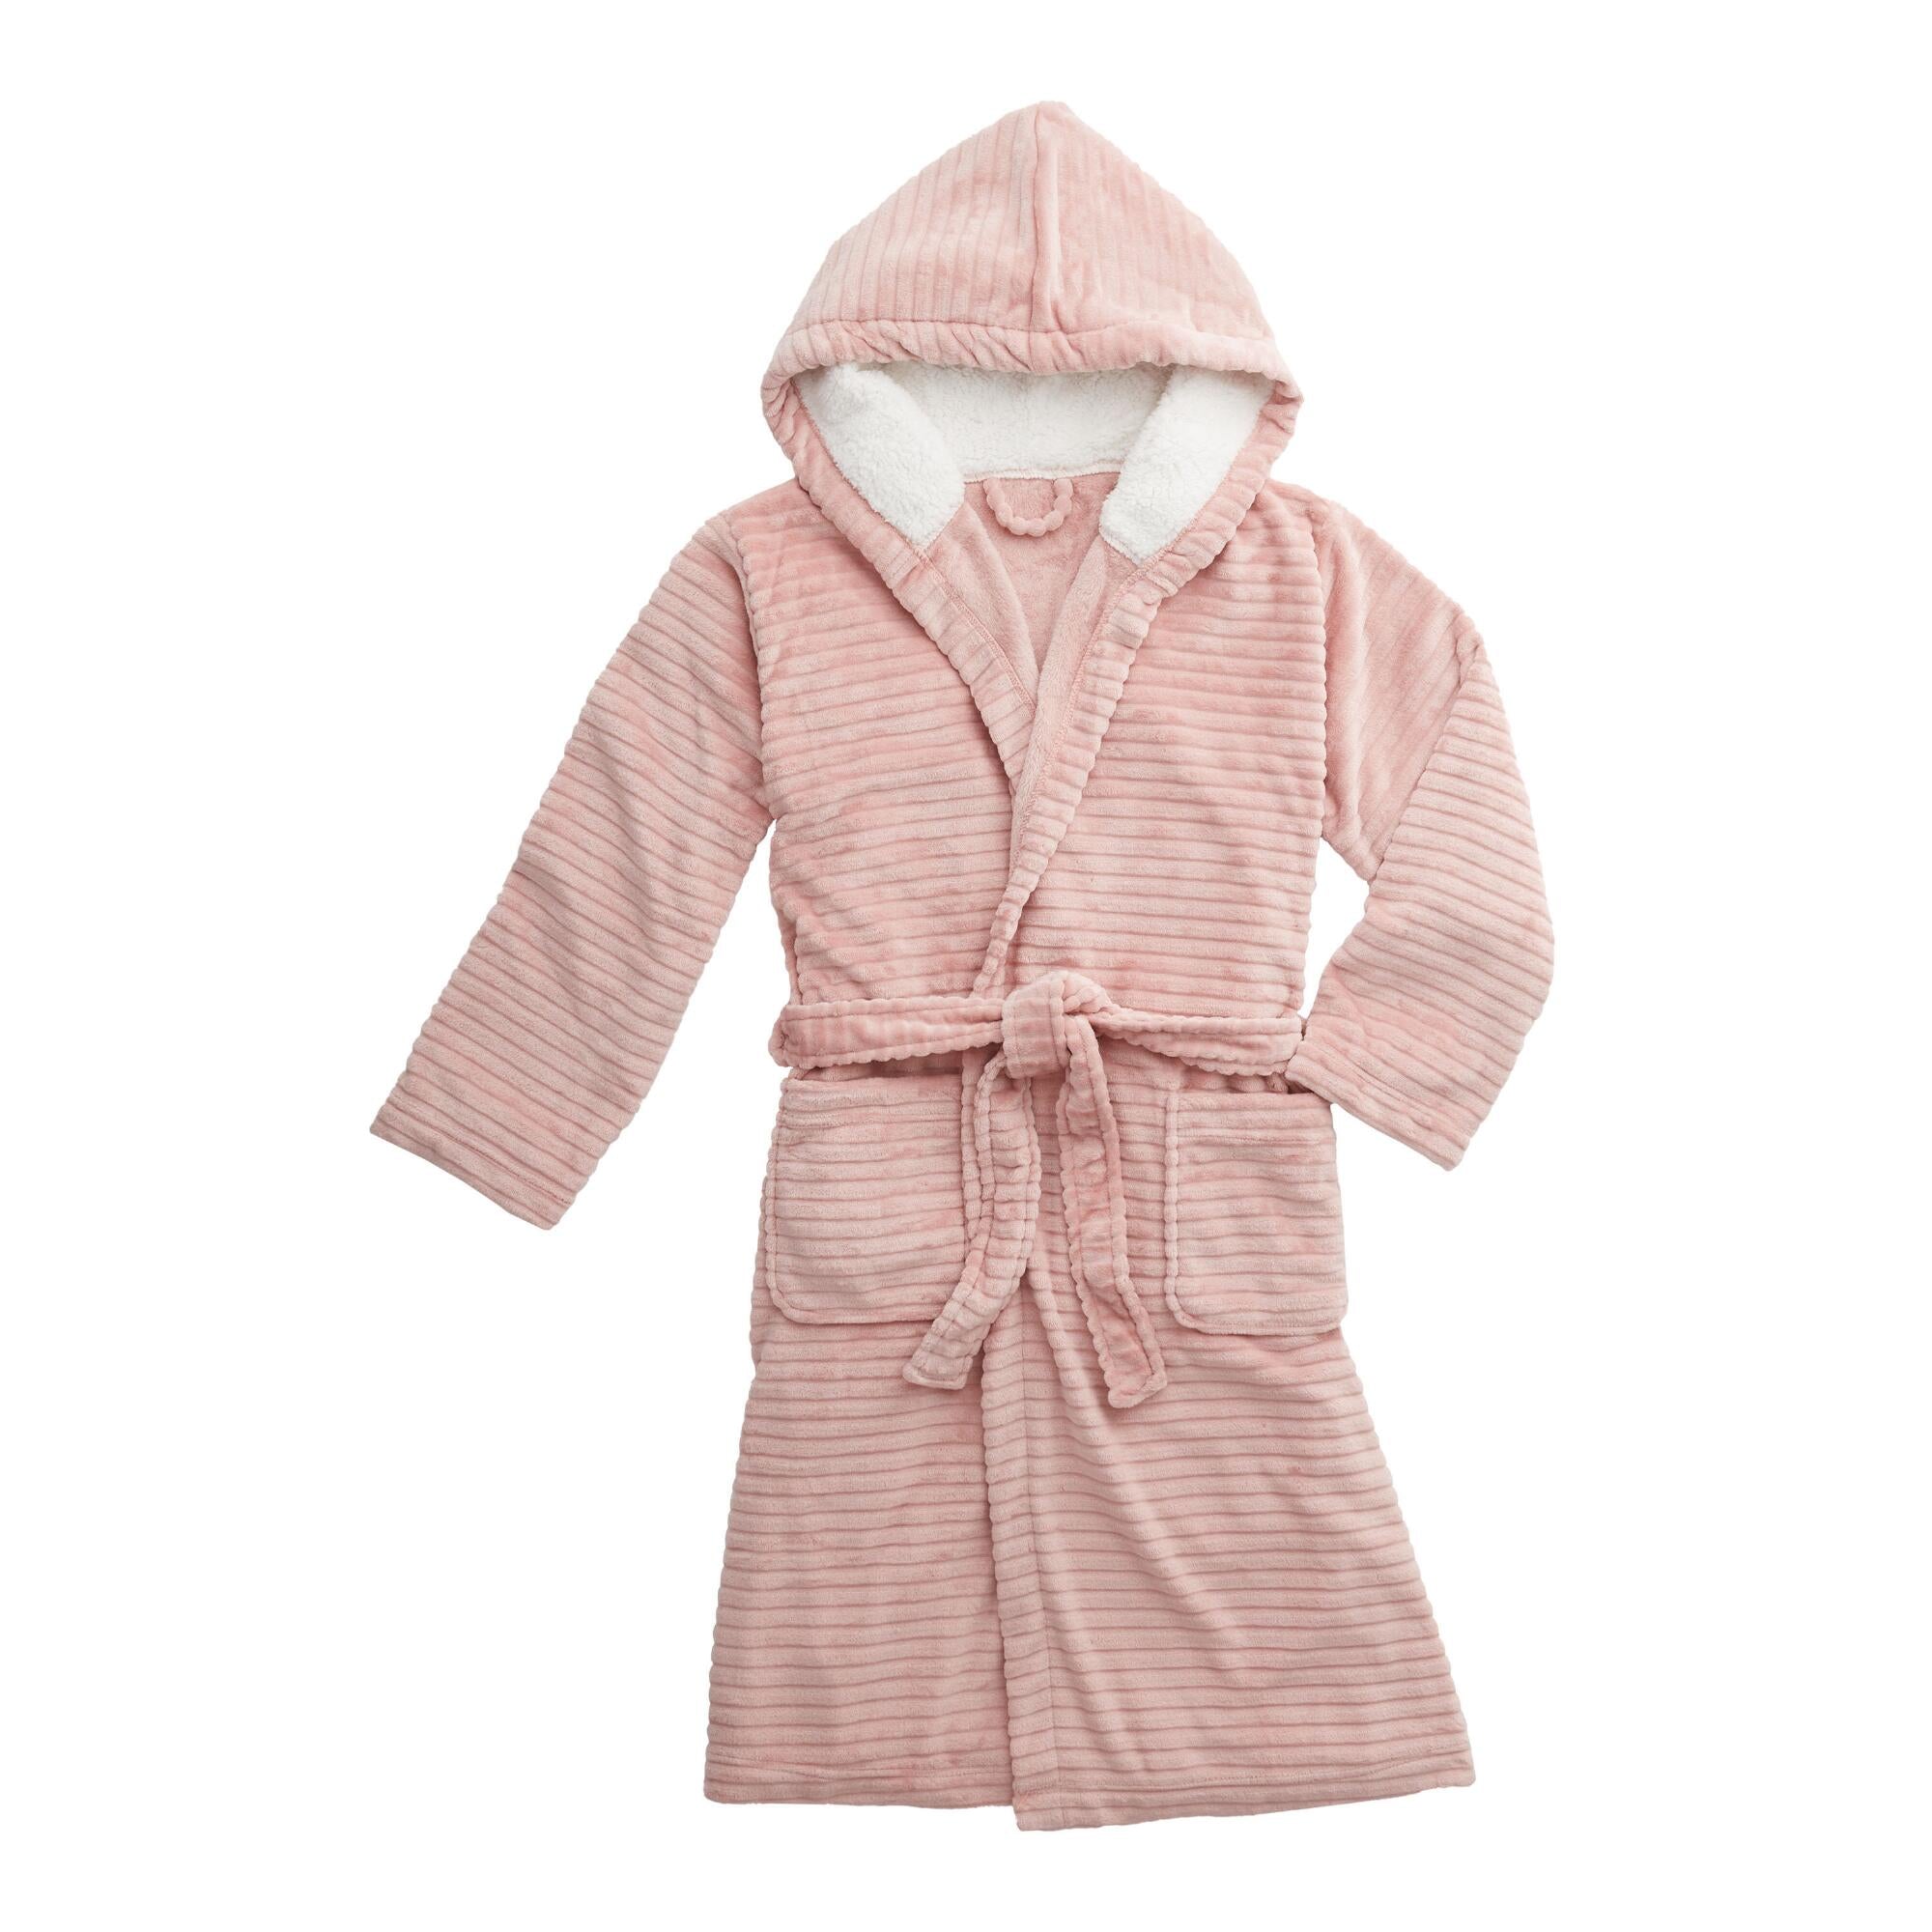 Pink robbed hooded robe with belt and oversize pockets.